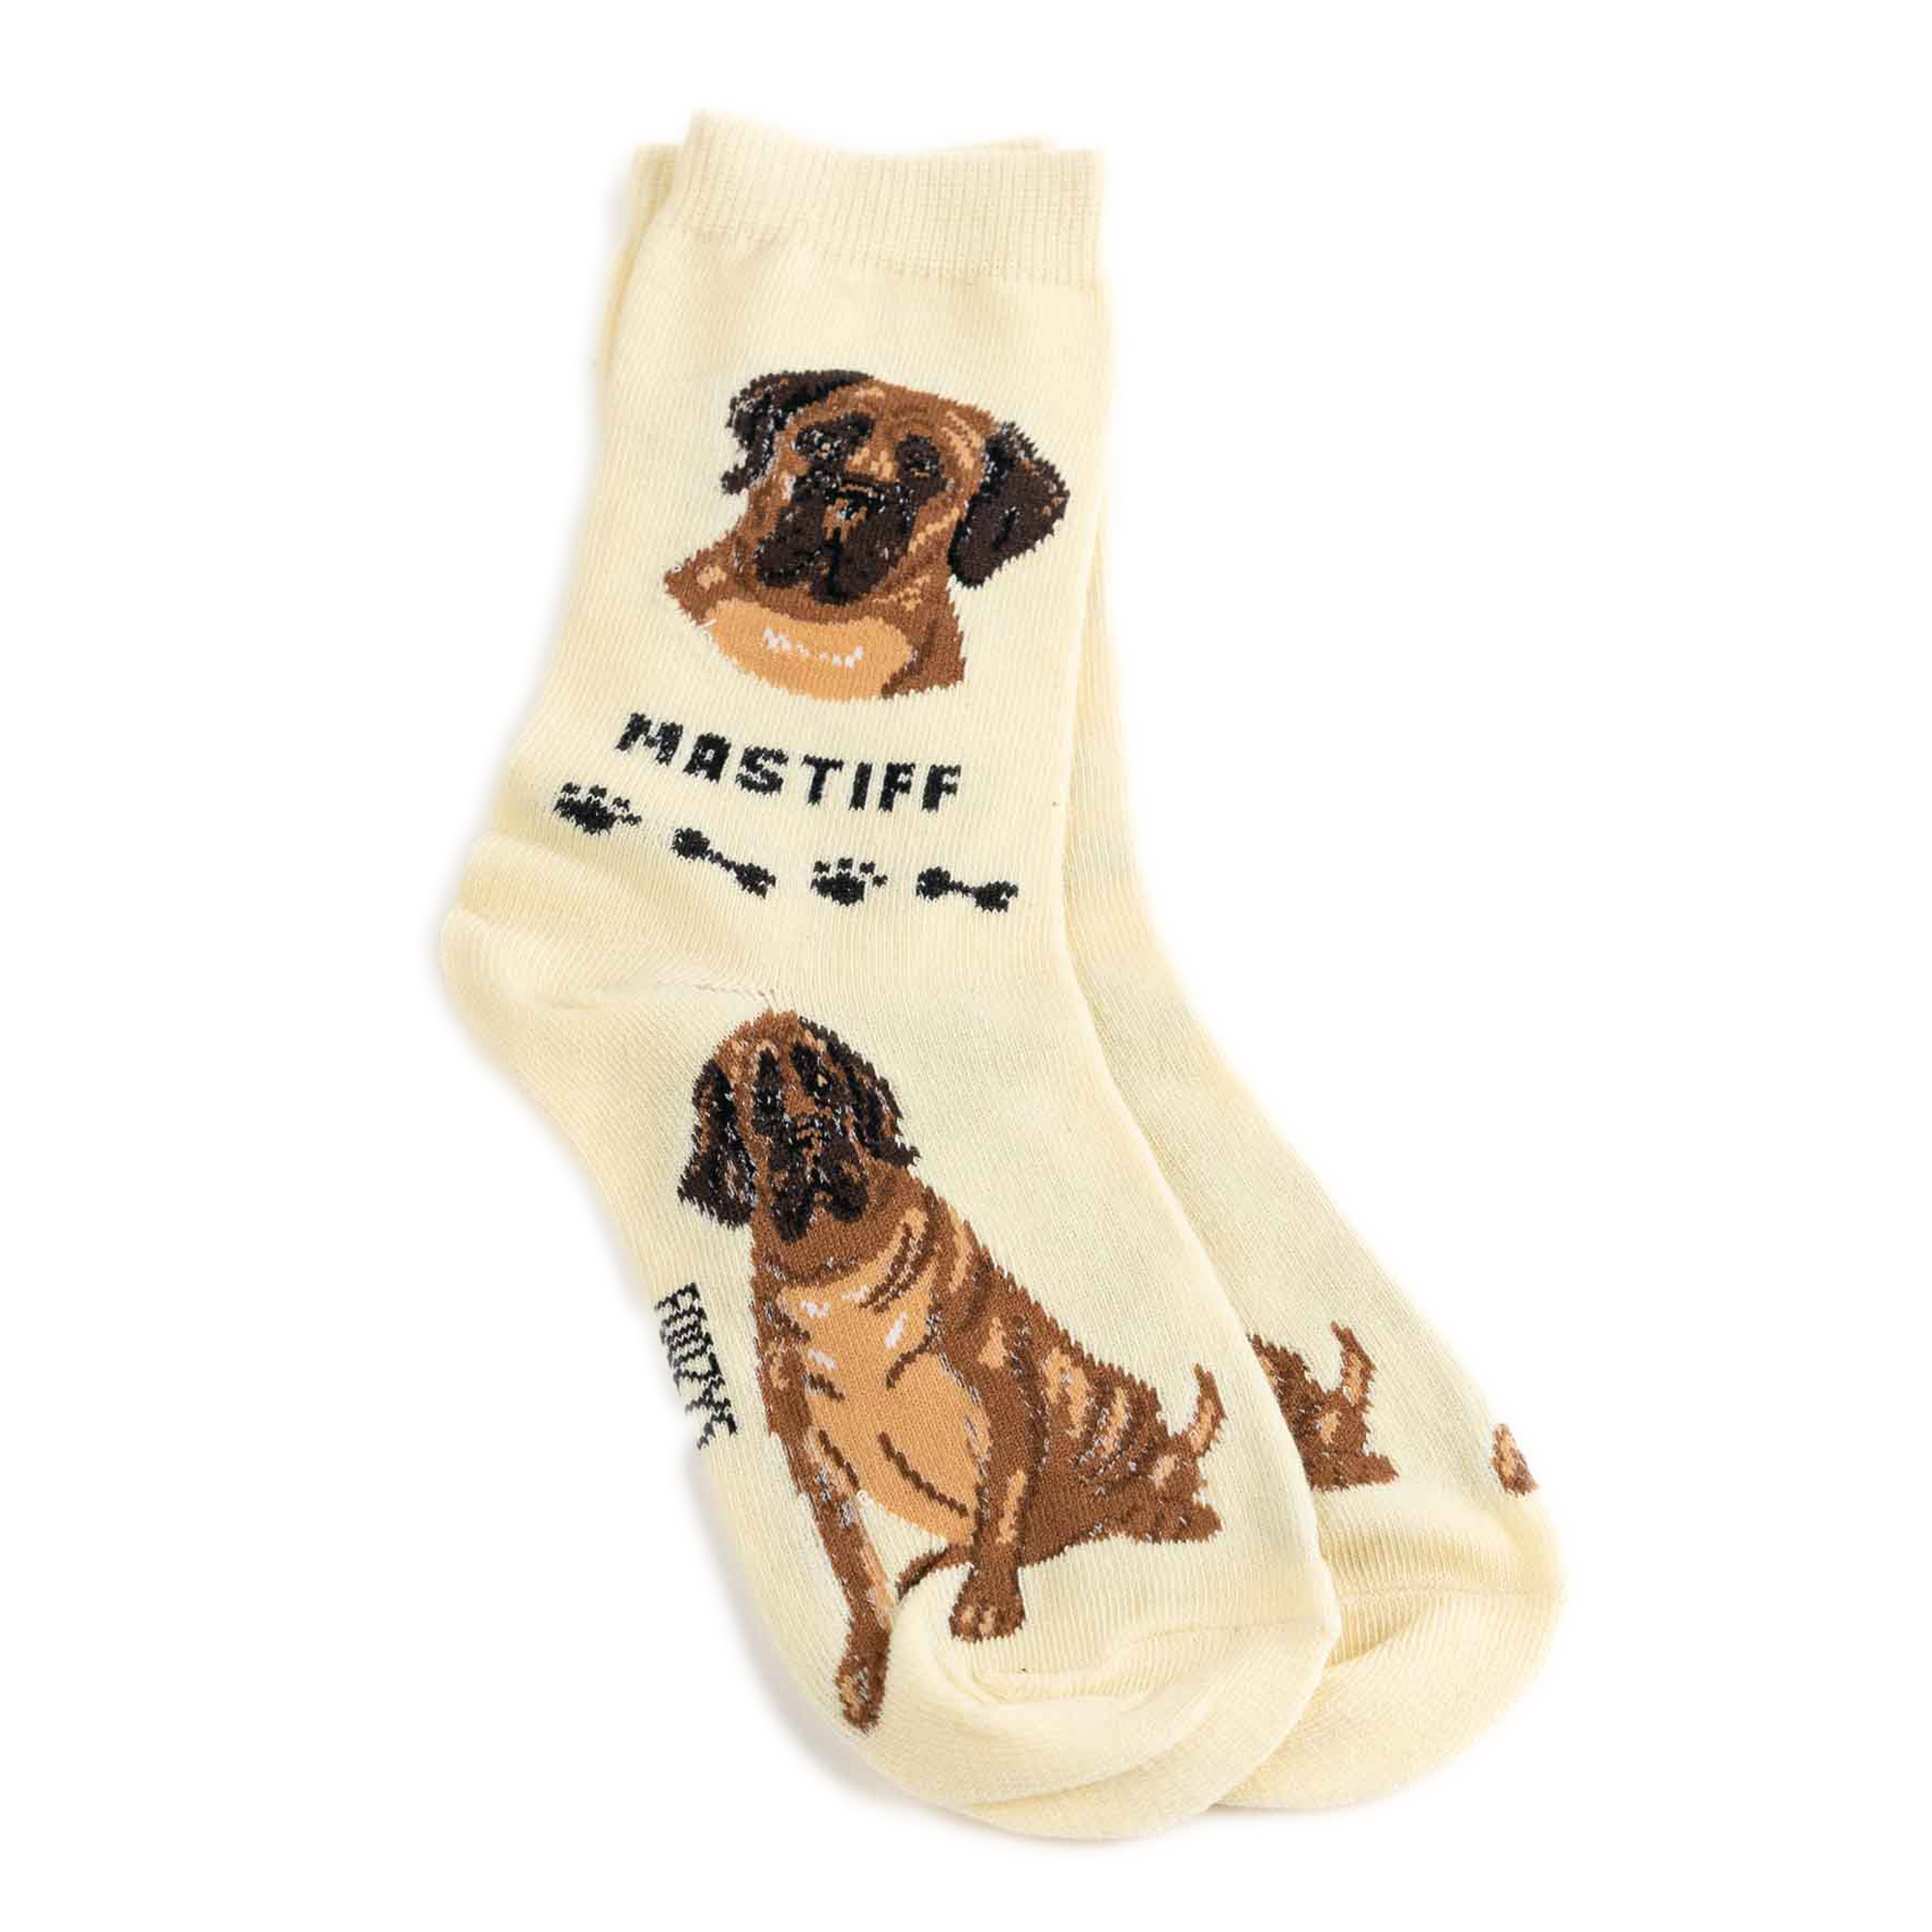 Do Non-Slip Dog Socks Really Work? - My Brown Newfies